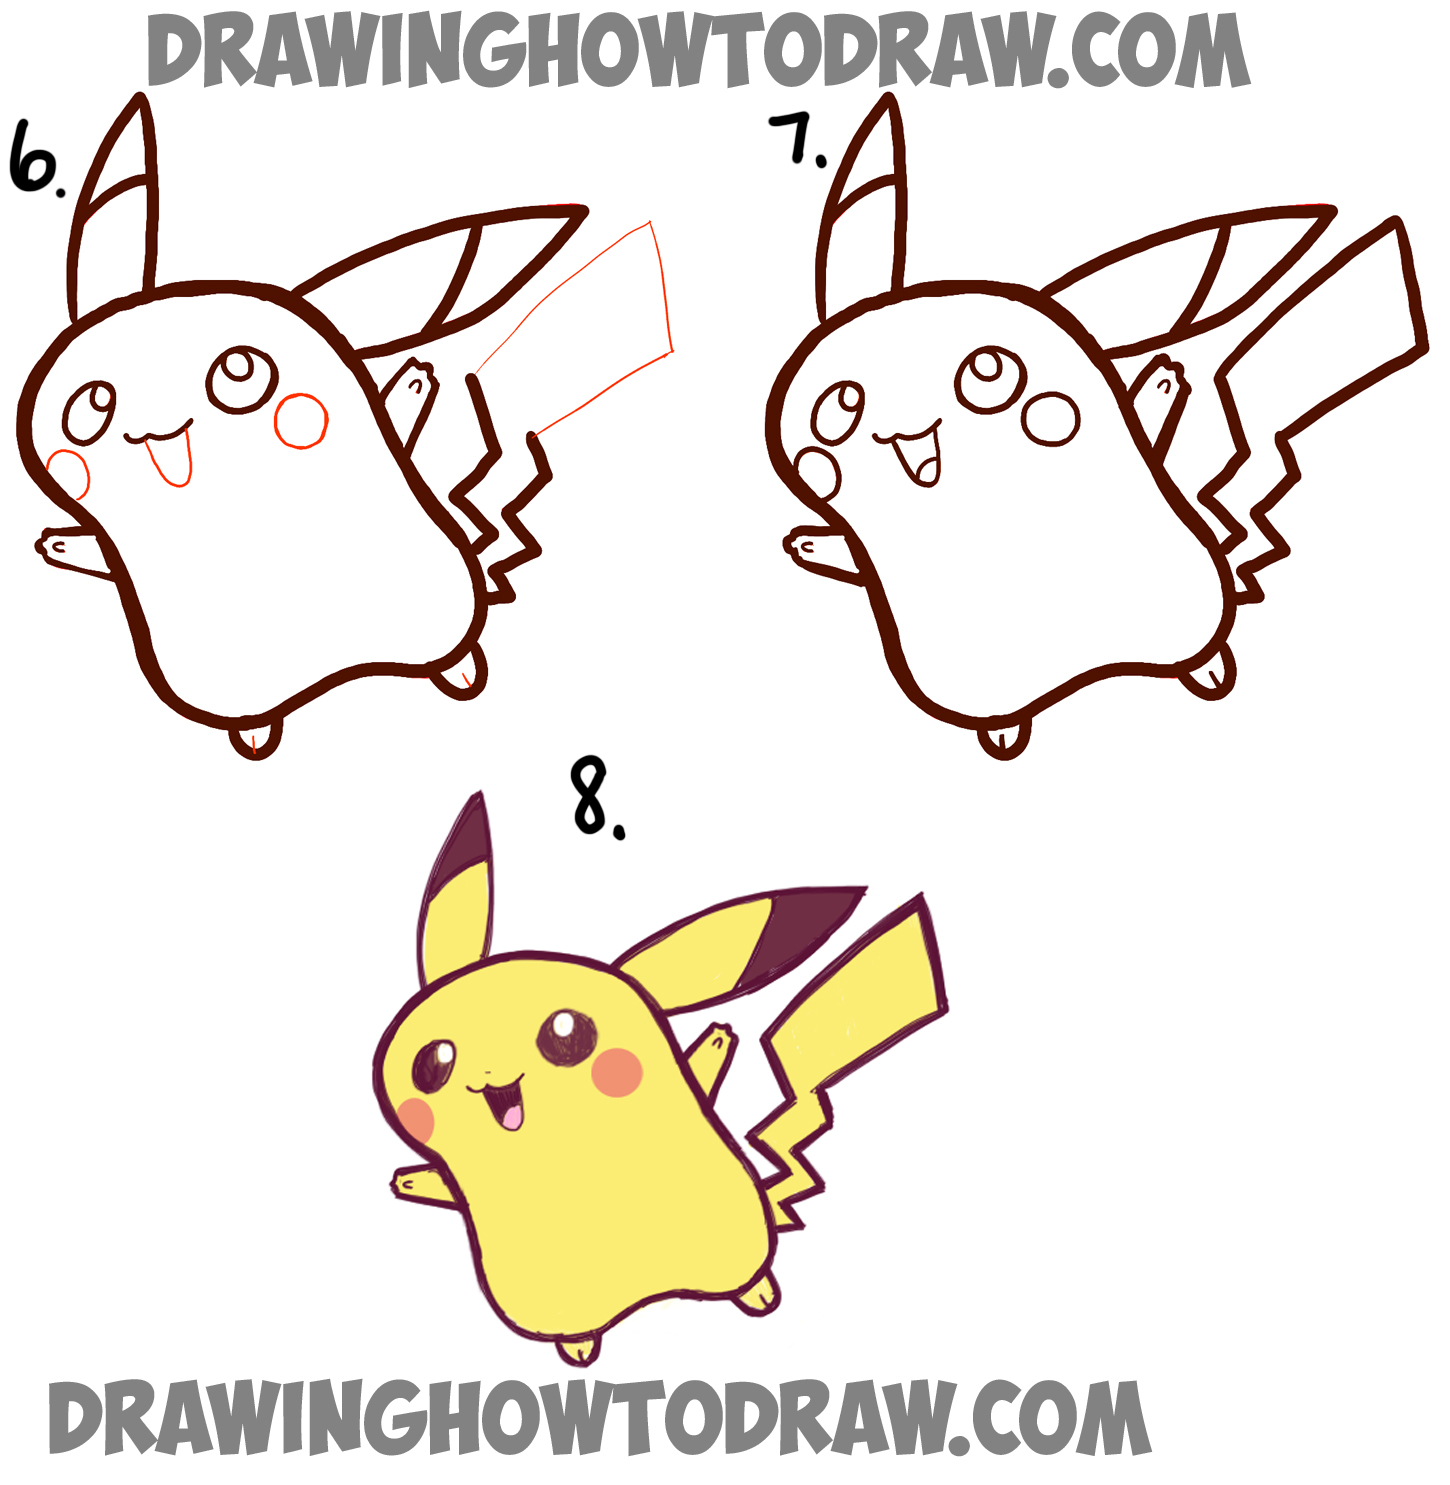 How to Draw Pikachu (Pokemon) VIDEO & Step-by-Step Pictures